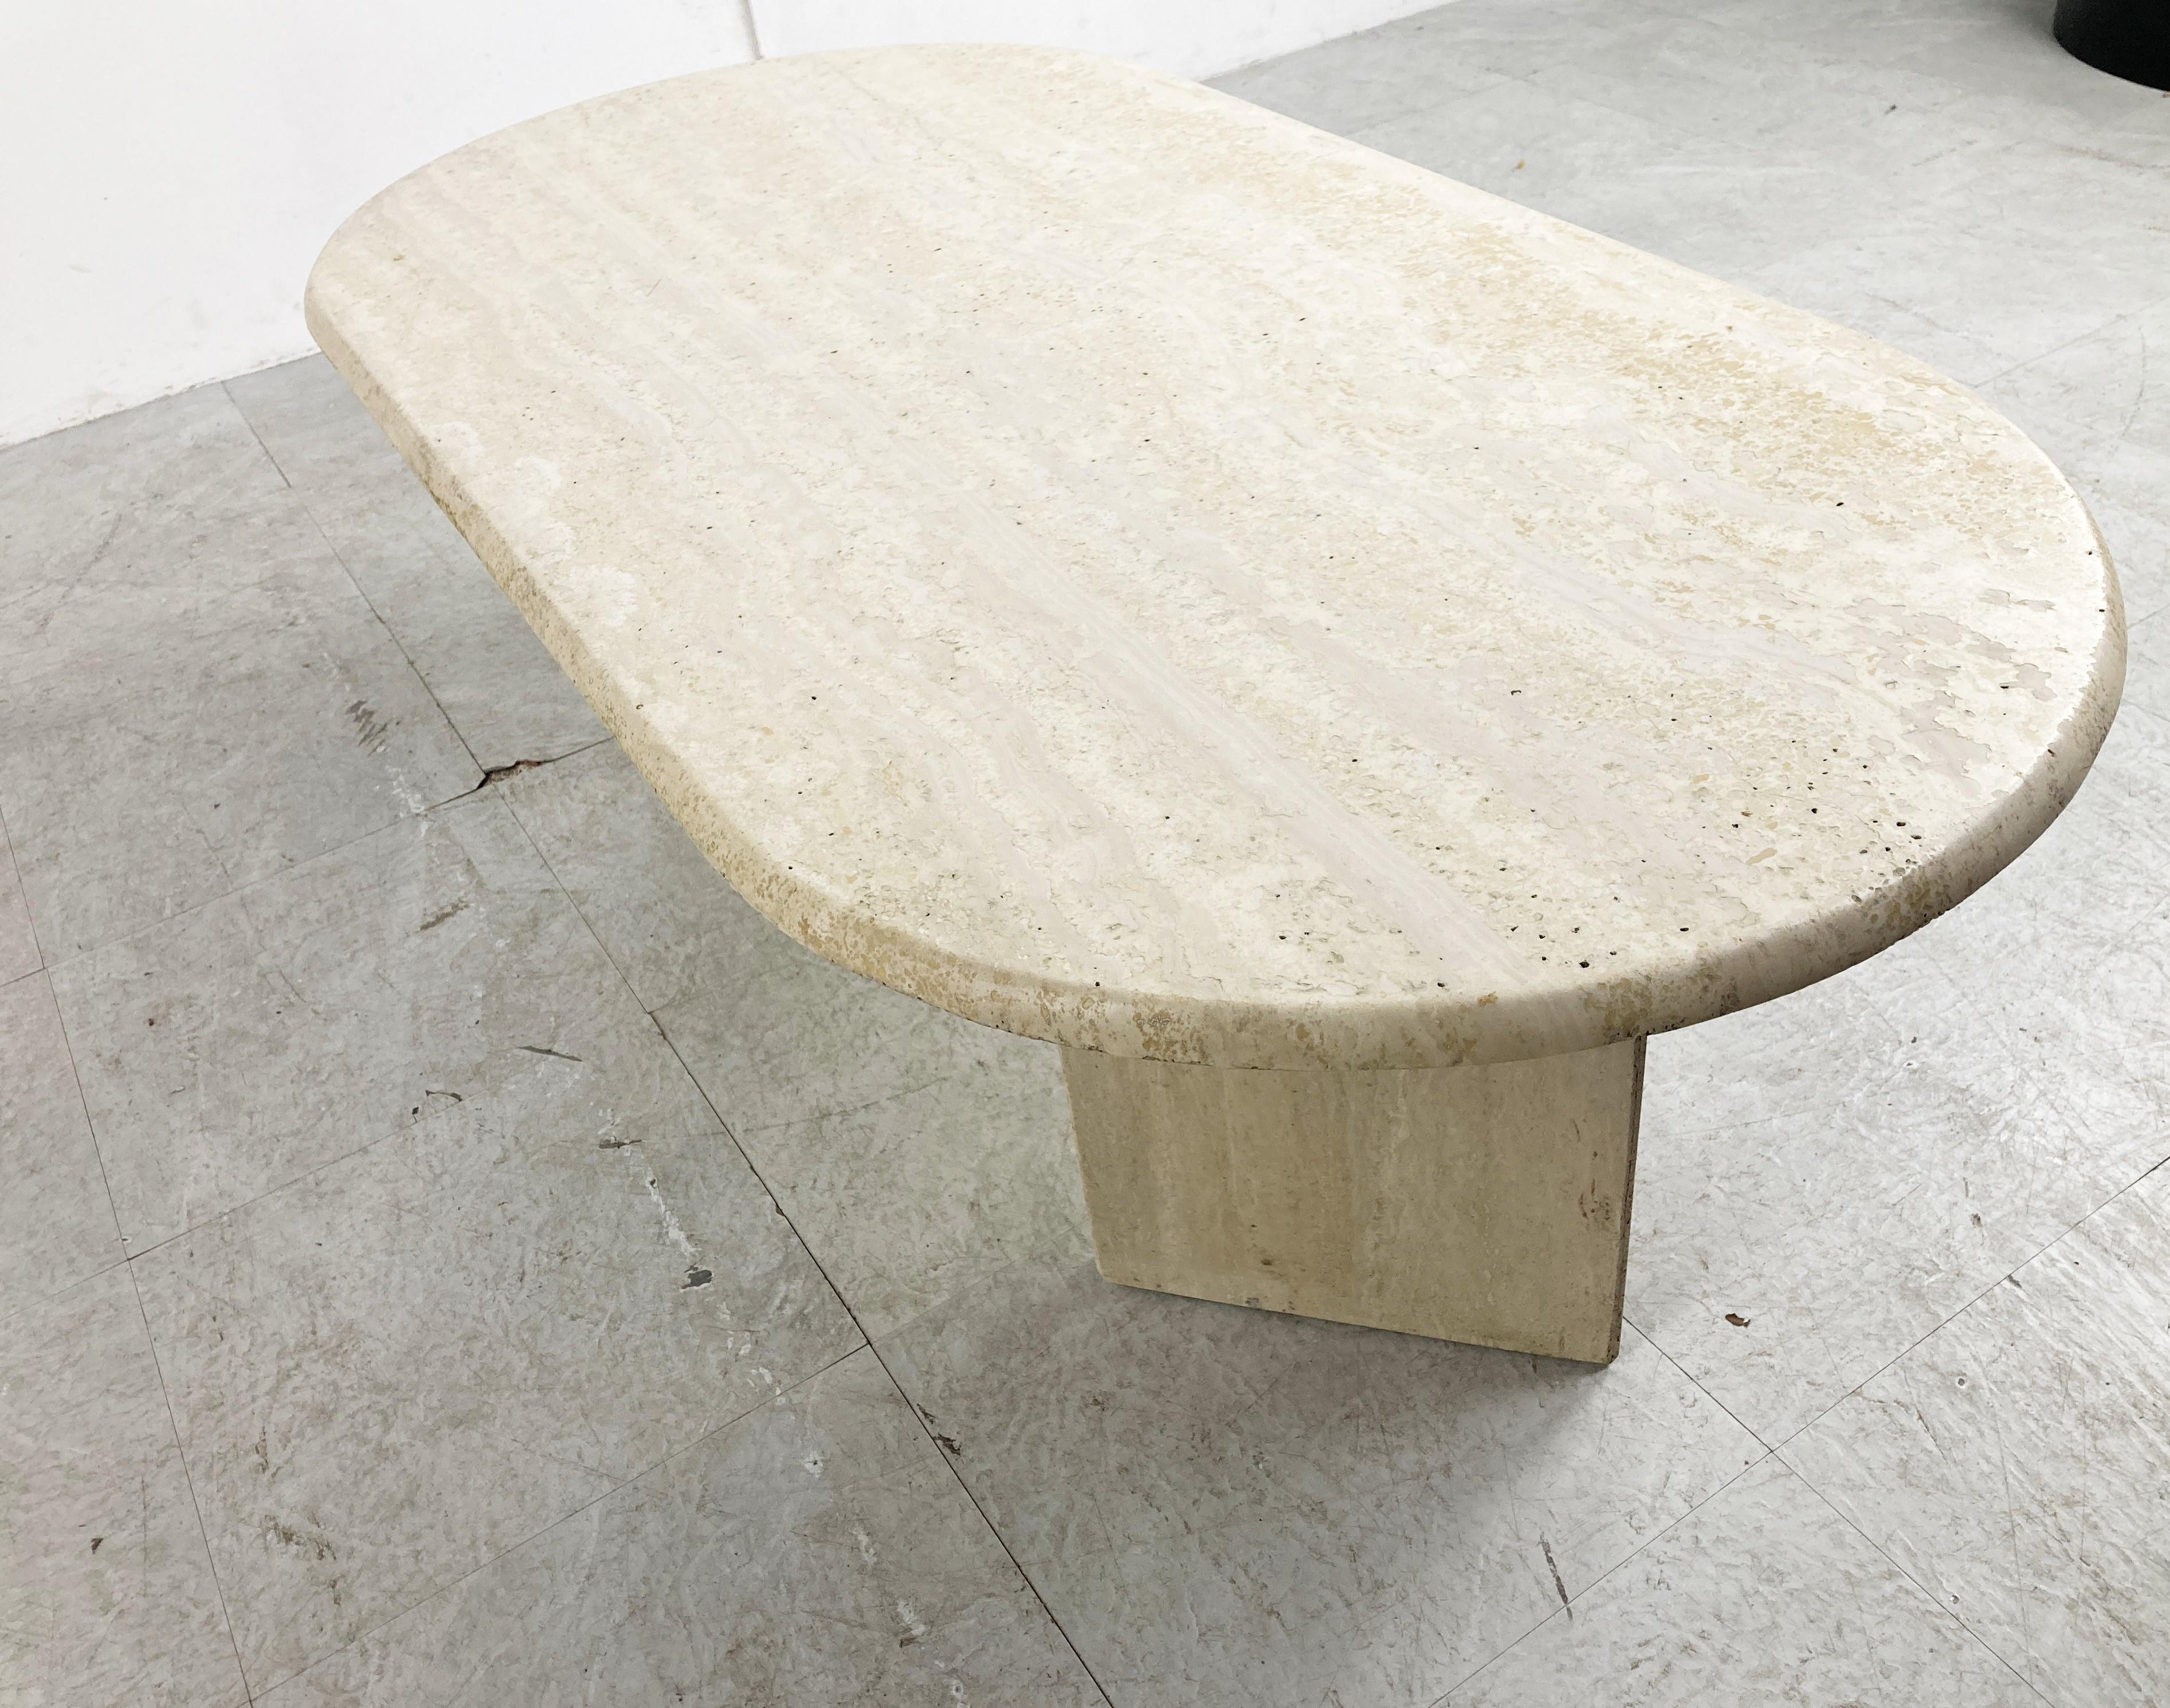 Elegant travertine coffee table with an oval beveled edge table top and two triangular bases.

Timeless piece.

Very good condition.

1970s - Italy

Dimensions
height: 38cm/14.96